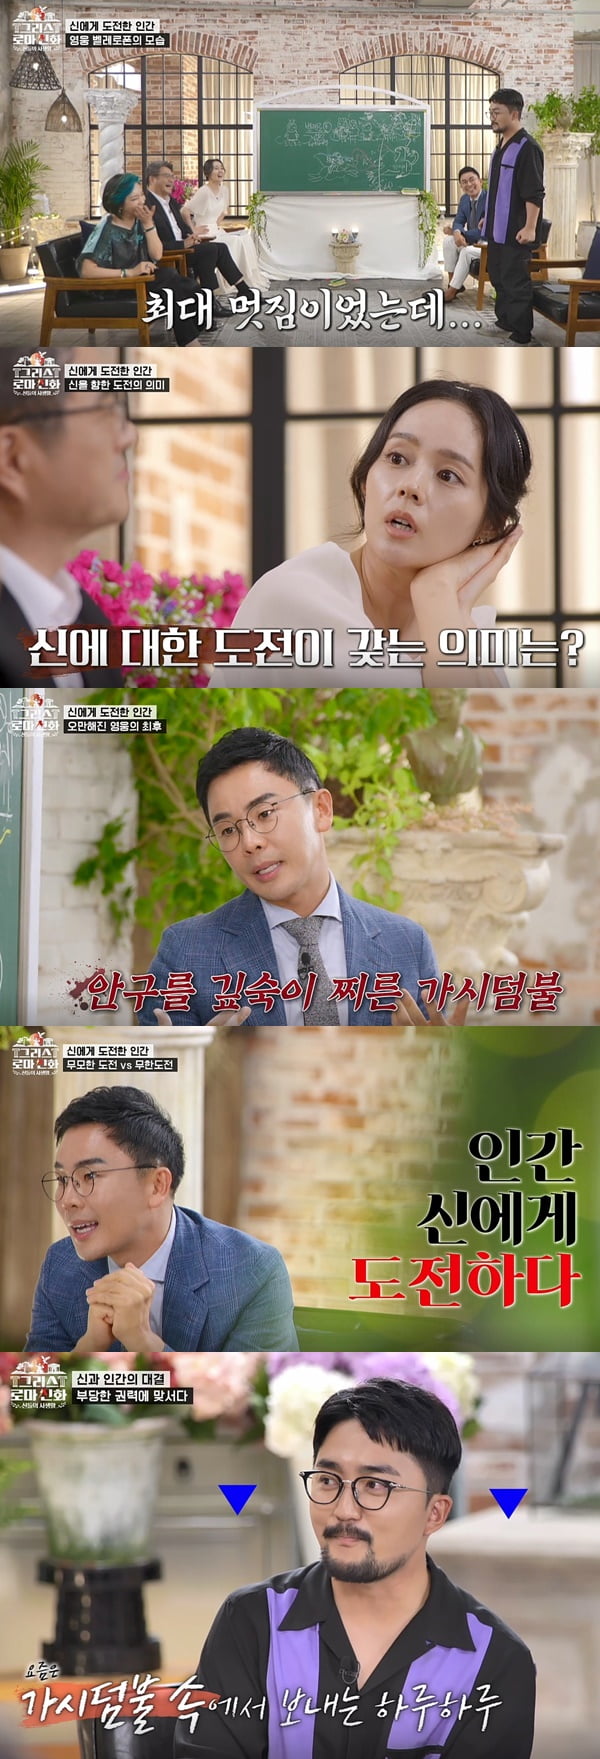 Yoo Byung-jae recently commented on the recent status of Share.In the 6th episode of MBN Greece Rome Shinhwa - The Privacy of the Gods broadcasted on the last 5 days, Han Ga-in, Seol Min-seok, Kim Heon, Han Gemma and special guest Yoo Byung-jae together talked about the story of human beings Top Model .On this day, Seol Min-seok, who told Shinhwa story to Hero, a god, nymph, and demigod, said, I will talk about human beings.When talent goes beyond the human world, humans do a tremendous Top Model for God, he told the story of a man, Bellerophon, who wanted to be like Hero Perseus.Bellerophon, who committed murder in his hometown, was driven to neighboring Europe, but after a twist and a twist, he rid himself of the monster chimera on a winged horse Pegasus and quickly emerged as Hero. He married the Princess of the Kingdom of Lycia and became the throne.But Bellerophons desire grew.Seol Min-seok said, Bellerophon became increasingly arrogant with power and honor. Bellerophon tried to climb Pegasus to Olympus with the gods.Zeus, who saw this, sent one to a small back that looked like a fly to punish him for trying to be a top model to God even though he had power, love, and dreams. He asked Pegasuss back, He said.Han Ga-in, who heard the tragedy of Bellerophon, said, What does it mean to be a top model for God?Professor Kim Heon said, In Greece, this idea is conceptualized ethically, and explained, If you cross the Moira (share, fraction) and commit Whibris (cross the line), you will surely receive Faith Nemesis (punishment).One Jemma said, Our human history seems to have a contradiction. On the other hand, it raises the question, Keep the fountain, but on the other hand, Do not you cross the line, jump over you?Han Ga-in said, If you do not do Top Model, you can not develop, but it may be a lesson that you should not be arrogant.After a fierce discussion, Seol Min-seok told the story of another human Arachne who had Top Model on Faith Might: There was a woman named Arachne in a poor house in Europe called Lydia.He was a textile artisan who reached the level of Faith. Arachne denied the praise of the people around him, he said.Athena, who oversees the fabric, was angry when she heard this story, but she turned into Grandmas Boy to test Arachne. But when Arakne said, Apologize to Athena, Grandmas Boy said, Are you senile?If Athena is there, ask her to come out. She said, Lets face it.Athena expressed Faiths power beautifully, but Arachne angered Athena by revealing Faiths absurdity and ugliness.Athena, who ruthlessly trampled on Arachne, turned Arachne into a spider because her anger was not solved.Han Ga-in said, Arachne is like a social whistleblower against power. Seol Min-seok agreed.Professor Kim said, The story of Arachne comforts me that your cowardice is as natural as it is, and also gives me the message It is so cool to fight properly, it is okay to fail.I hope that the story of Arachne will be sympathetic and comforting to young people who have a lot of troubles in life. Yoo Byung-jae suddenly Confessions the current Share situation: Yoo Byung-jae said, I did Share about a year or two ago, and it skyrocketed tremendously.I thought I shouldnt be arrogant, but when I heard Bellerophons story, I thought Id try a little more Top Model.